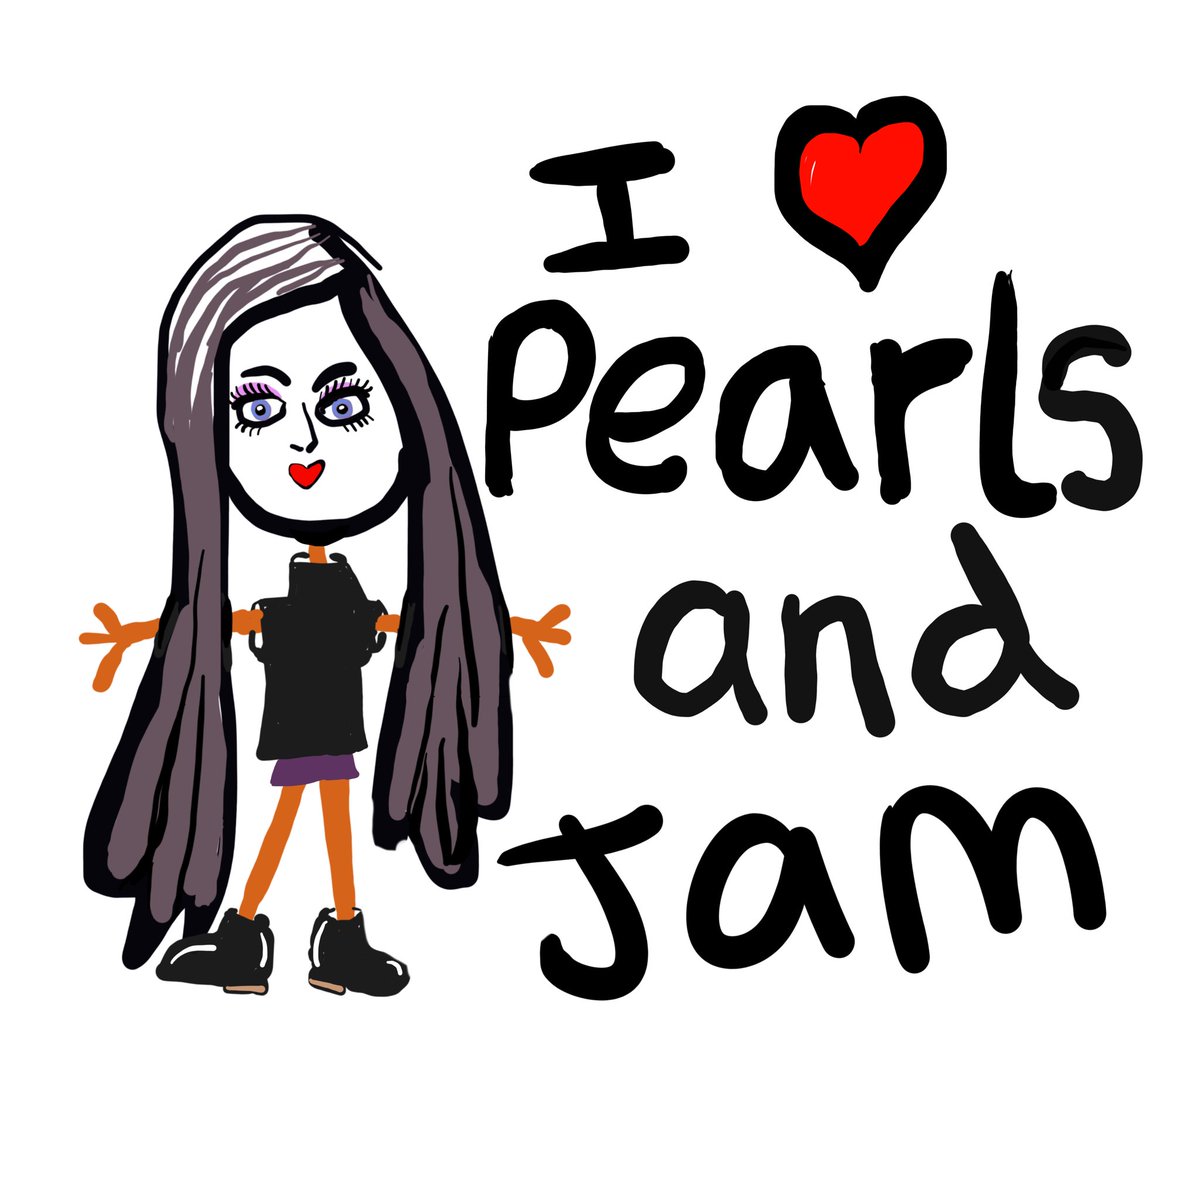 Grunger Girl originally said “I ❤️ Pearl Jam” but Redbubble didn’t like that, so I changed her. I kind of like her better now. #90smusic #grunge #pearljam #evenflow #Seattle #seattlesound #90s #Esmersmellder